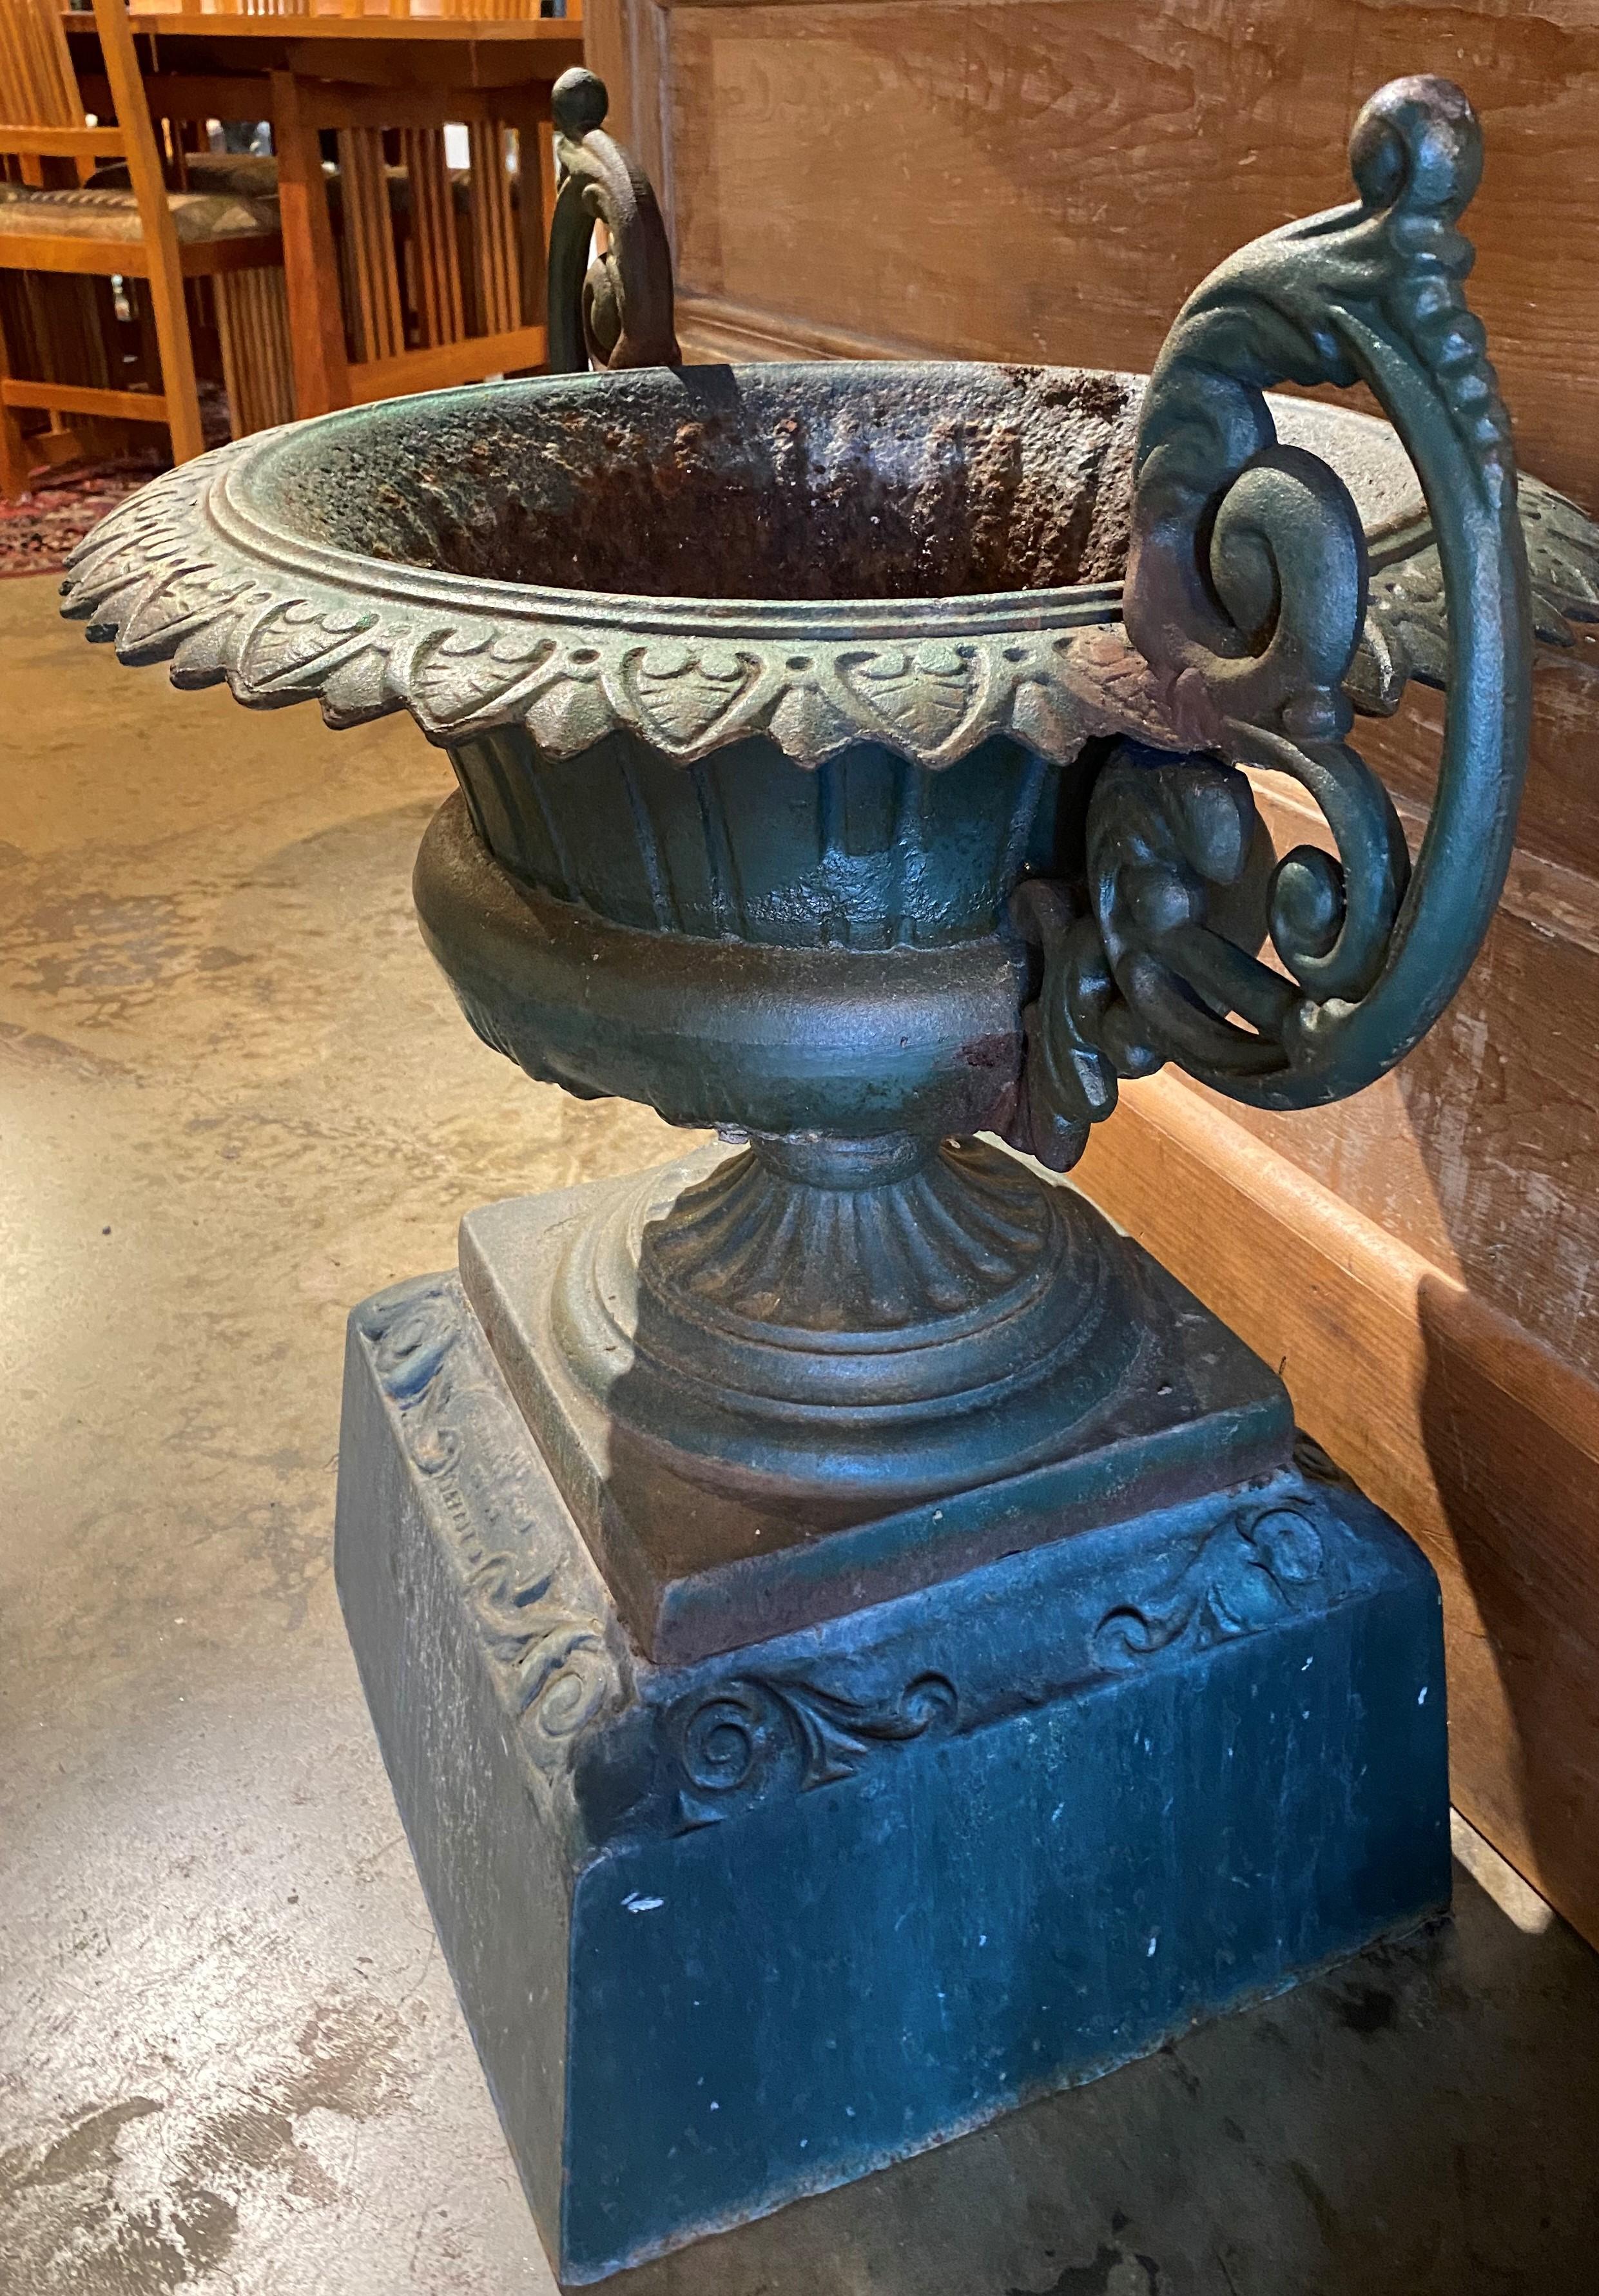 Neoclassical Pair of 19th Century Classical Form Cast Iron Urns by Kramer Bros Foundry